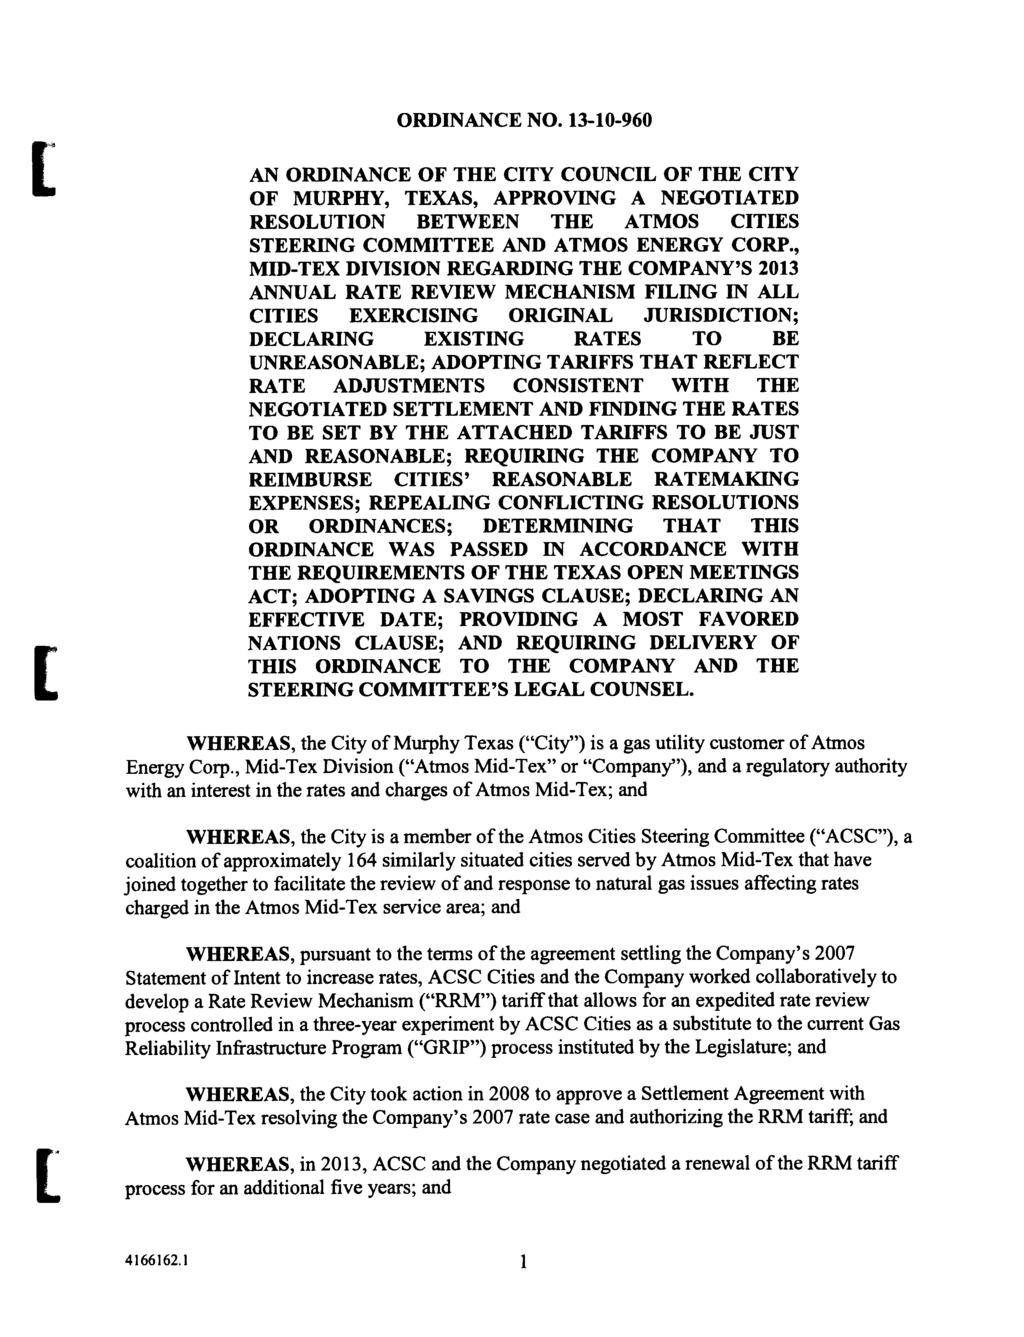 ORDINANCE NO. 13-10- 960 AN ORDINANCE OF THE CITY COUNCIL OF THE CITY OF MURPHY, TEXAS, APPROVING A NEGOTIATED RESOLUTION BETWEEN THE ATMOS CITIES STEERING COMMITTEE AND ATMOS ENERGY CORP.